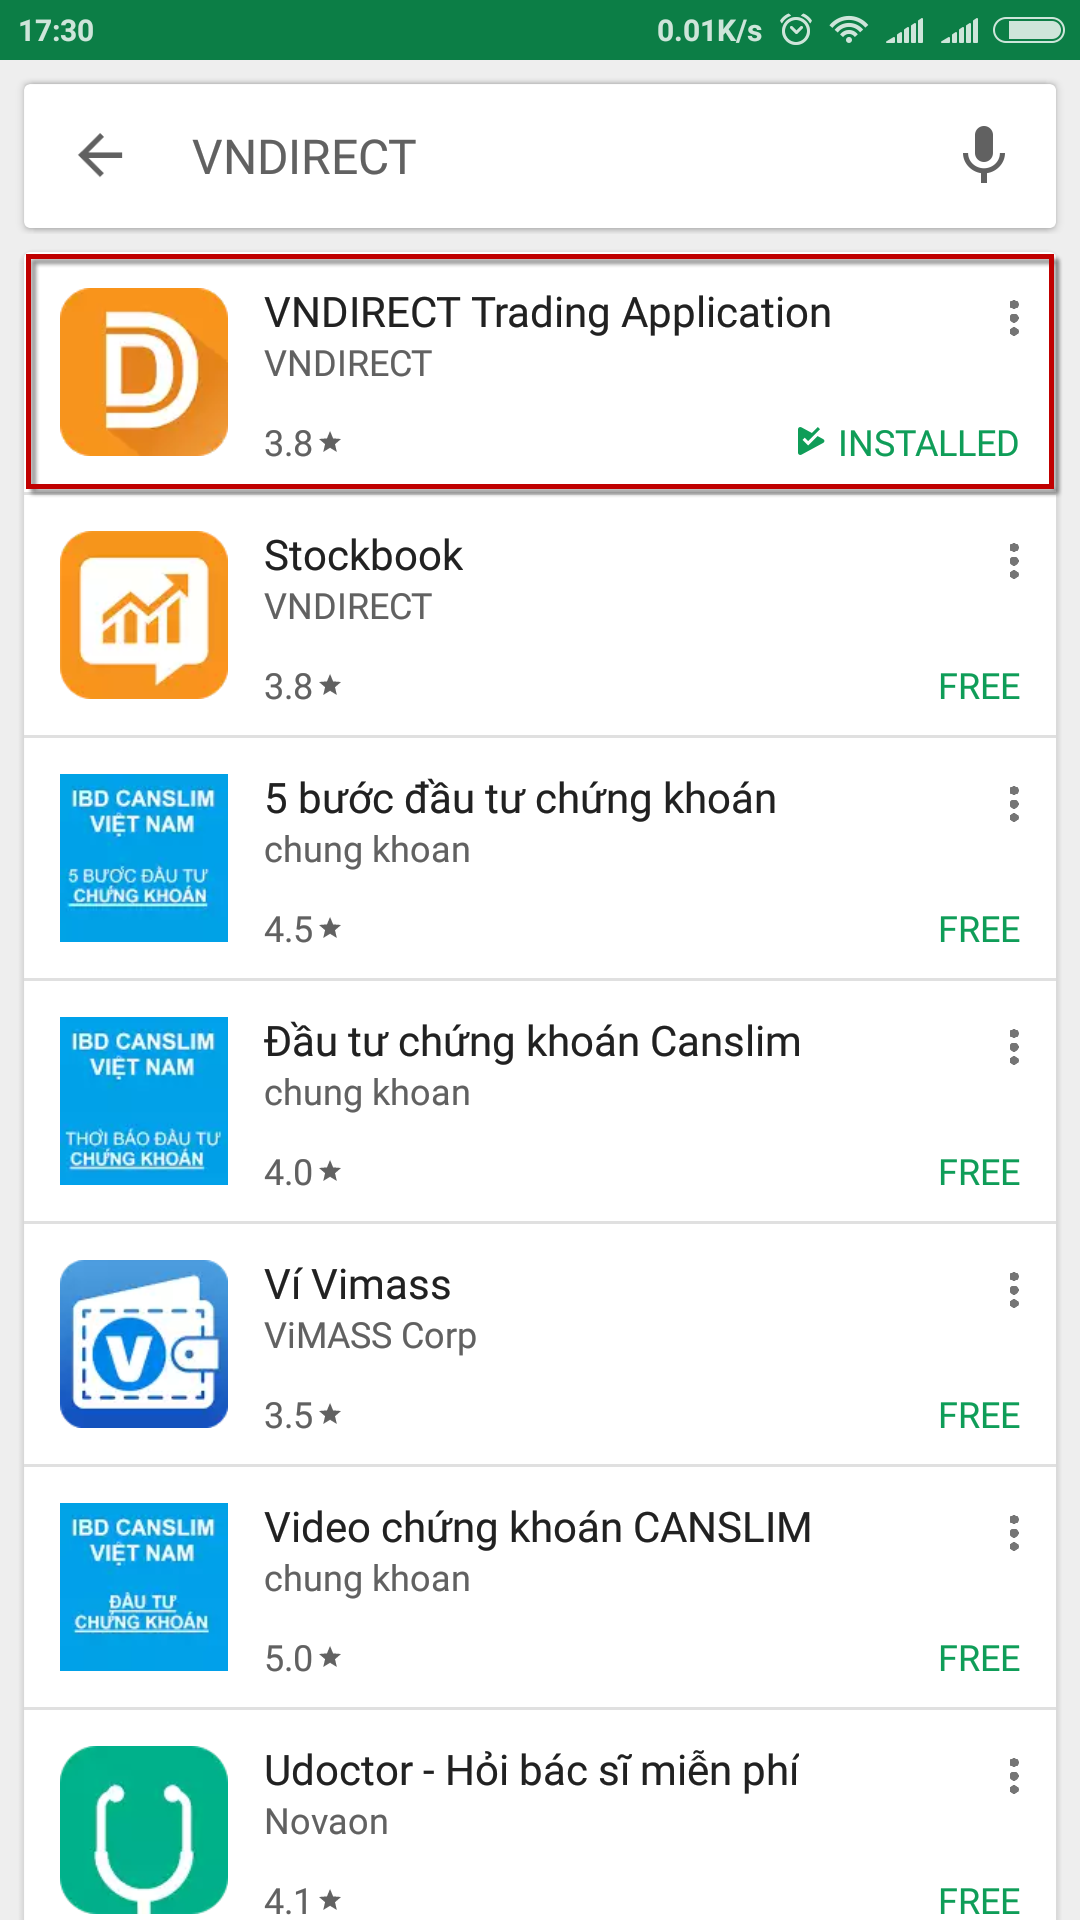 VNDIRECT app in Play Store